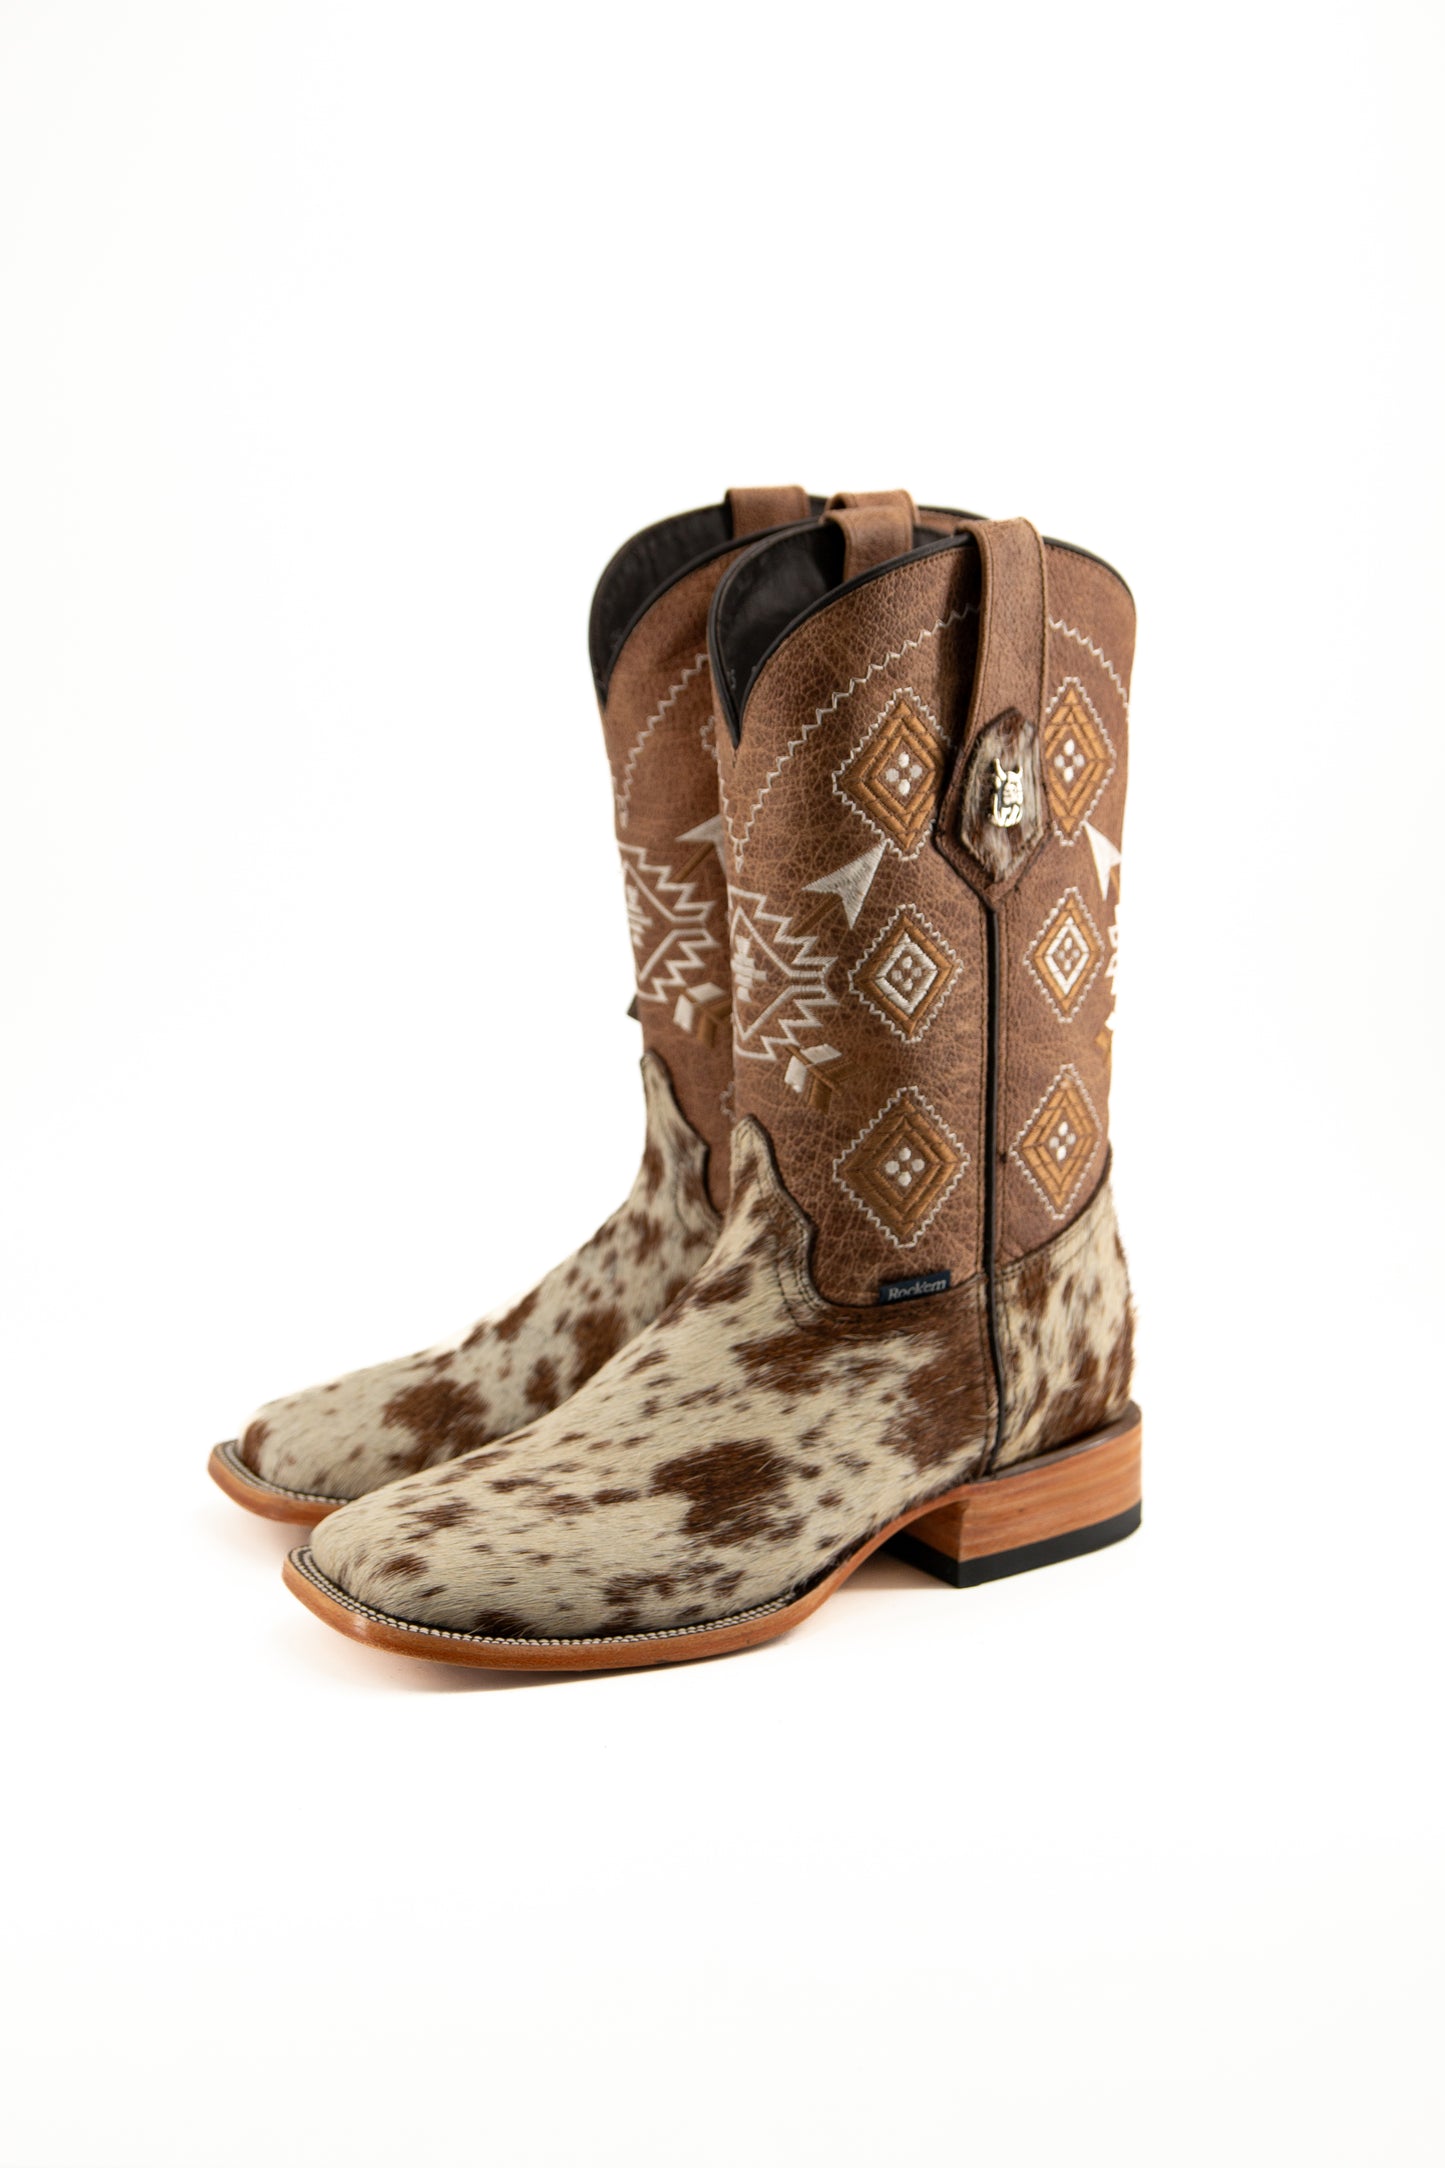 Men's Cowhide Boots Size 6 Box 2 (As Seen On Image)